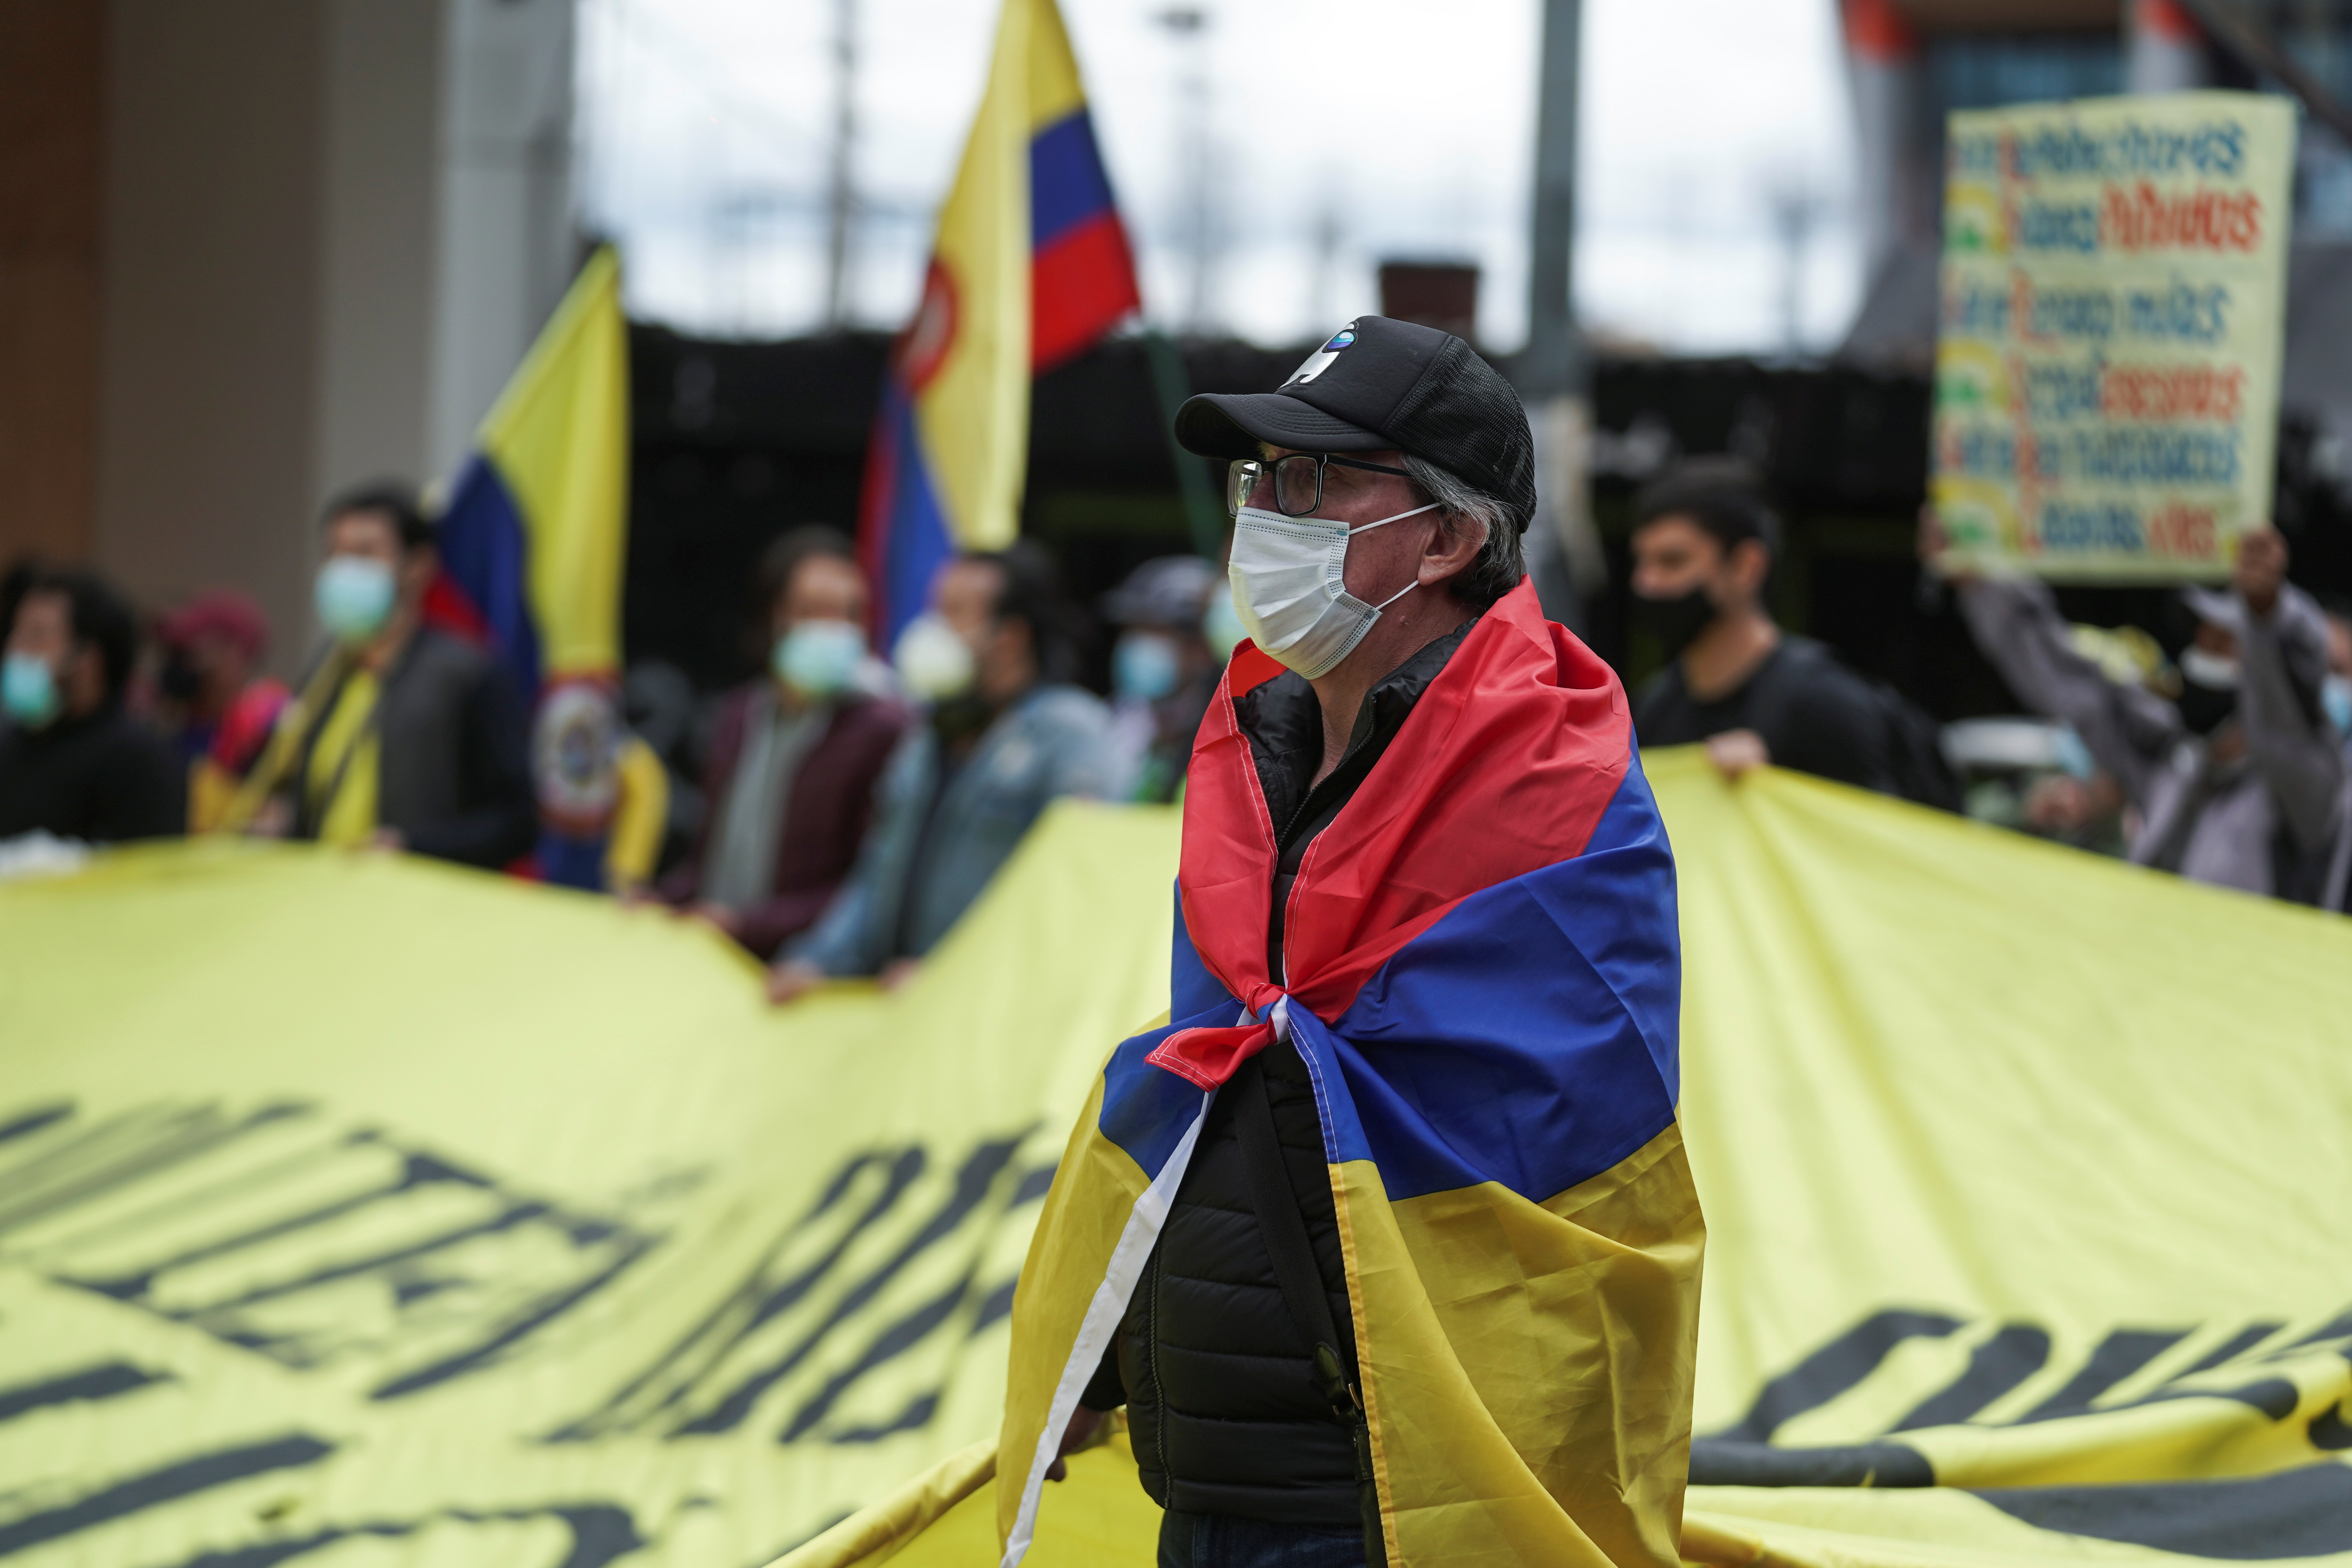 Demonstrators gather for an anti-government march demanding changes to the social and economic policies, during Colombia's Independence Day, in Bogota